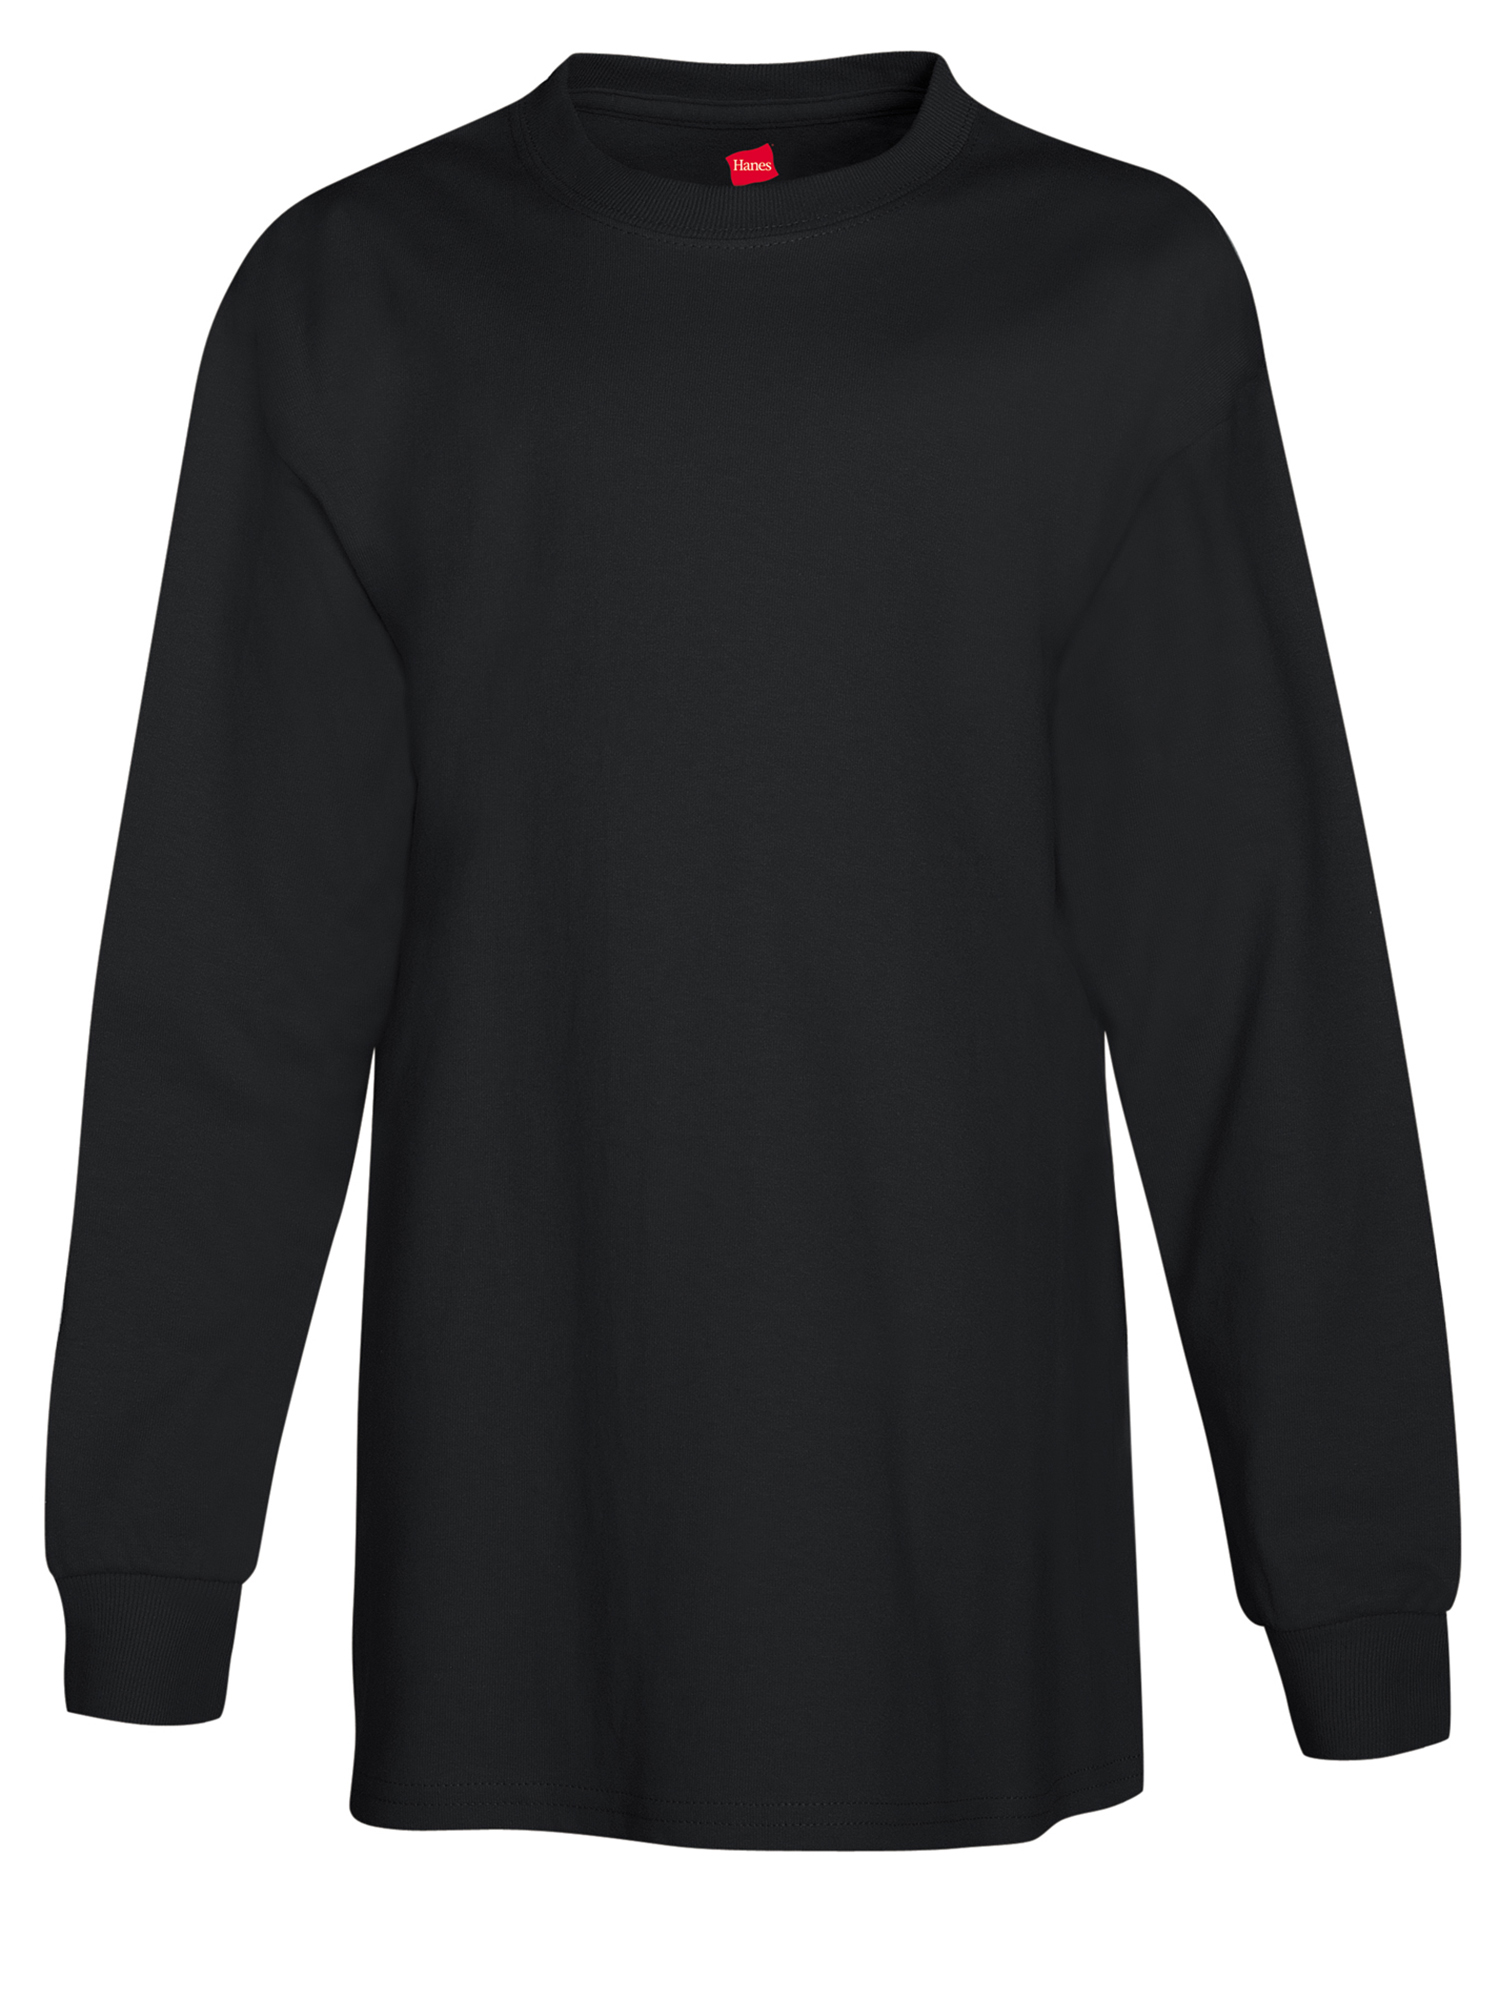 Hanes Boys 4-18 Authentic Long Sleeve Tee - image 1 of 2